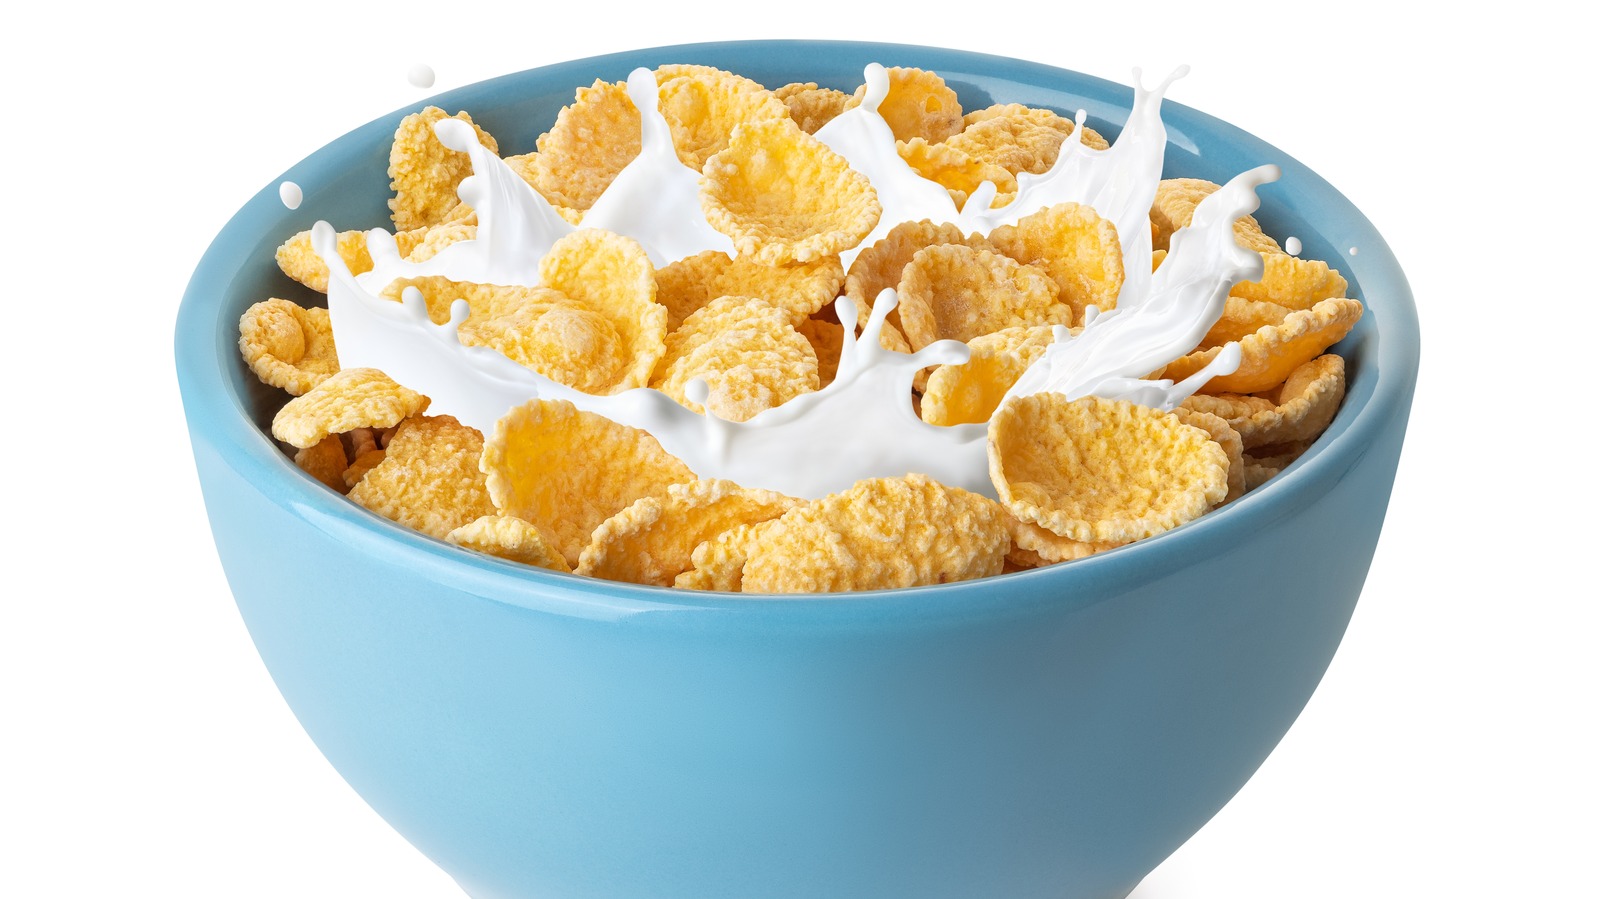 https://www.thedailymeal.com/img/gallery/11-healthy-cereals-that-are-actually-tasty/l-intro-1678891755.jpg